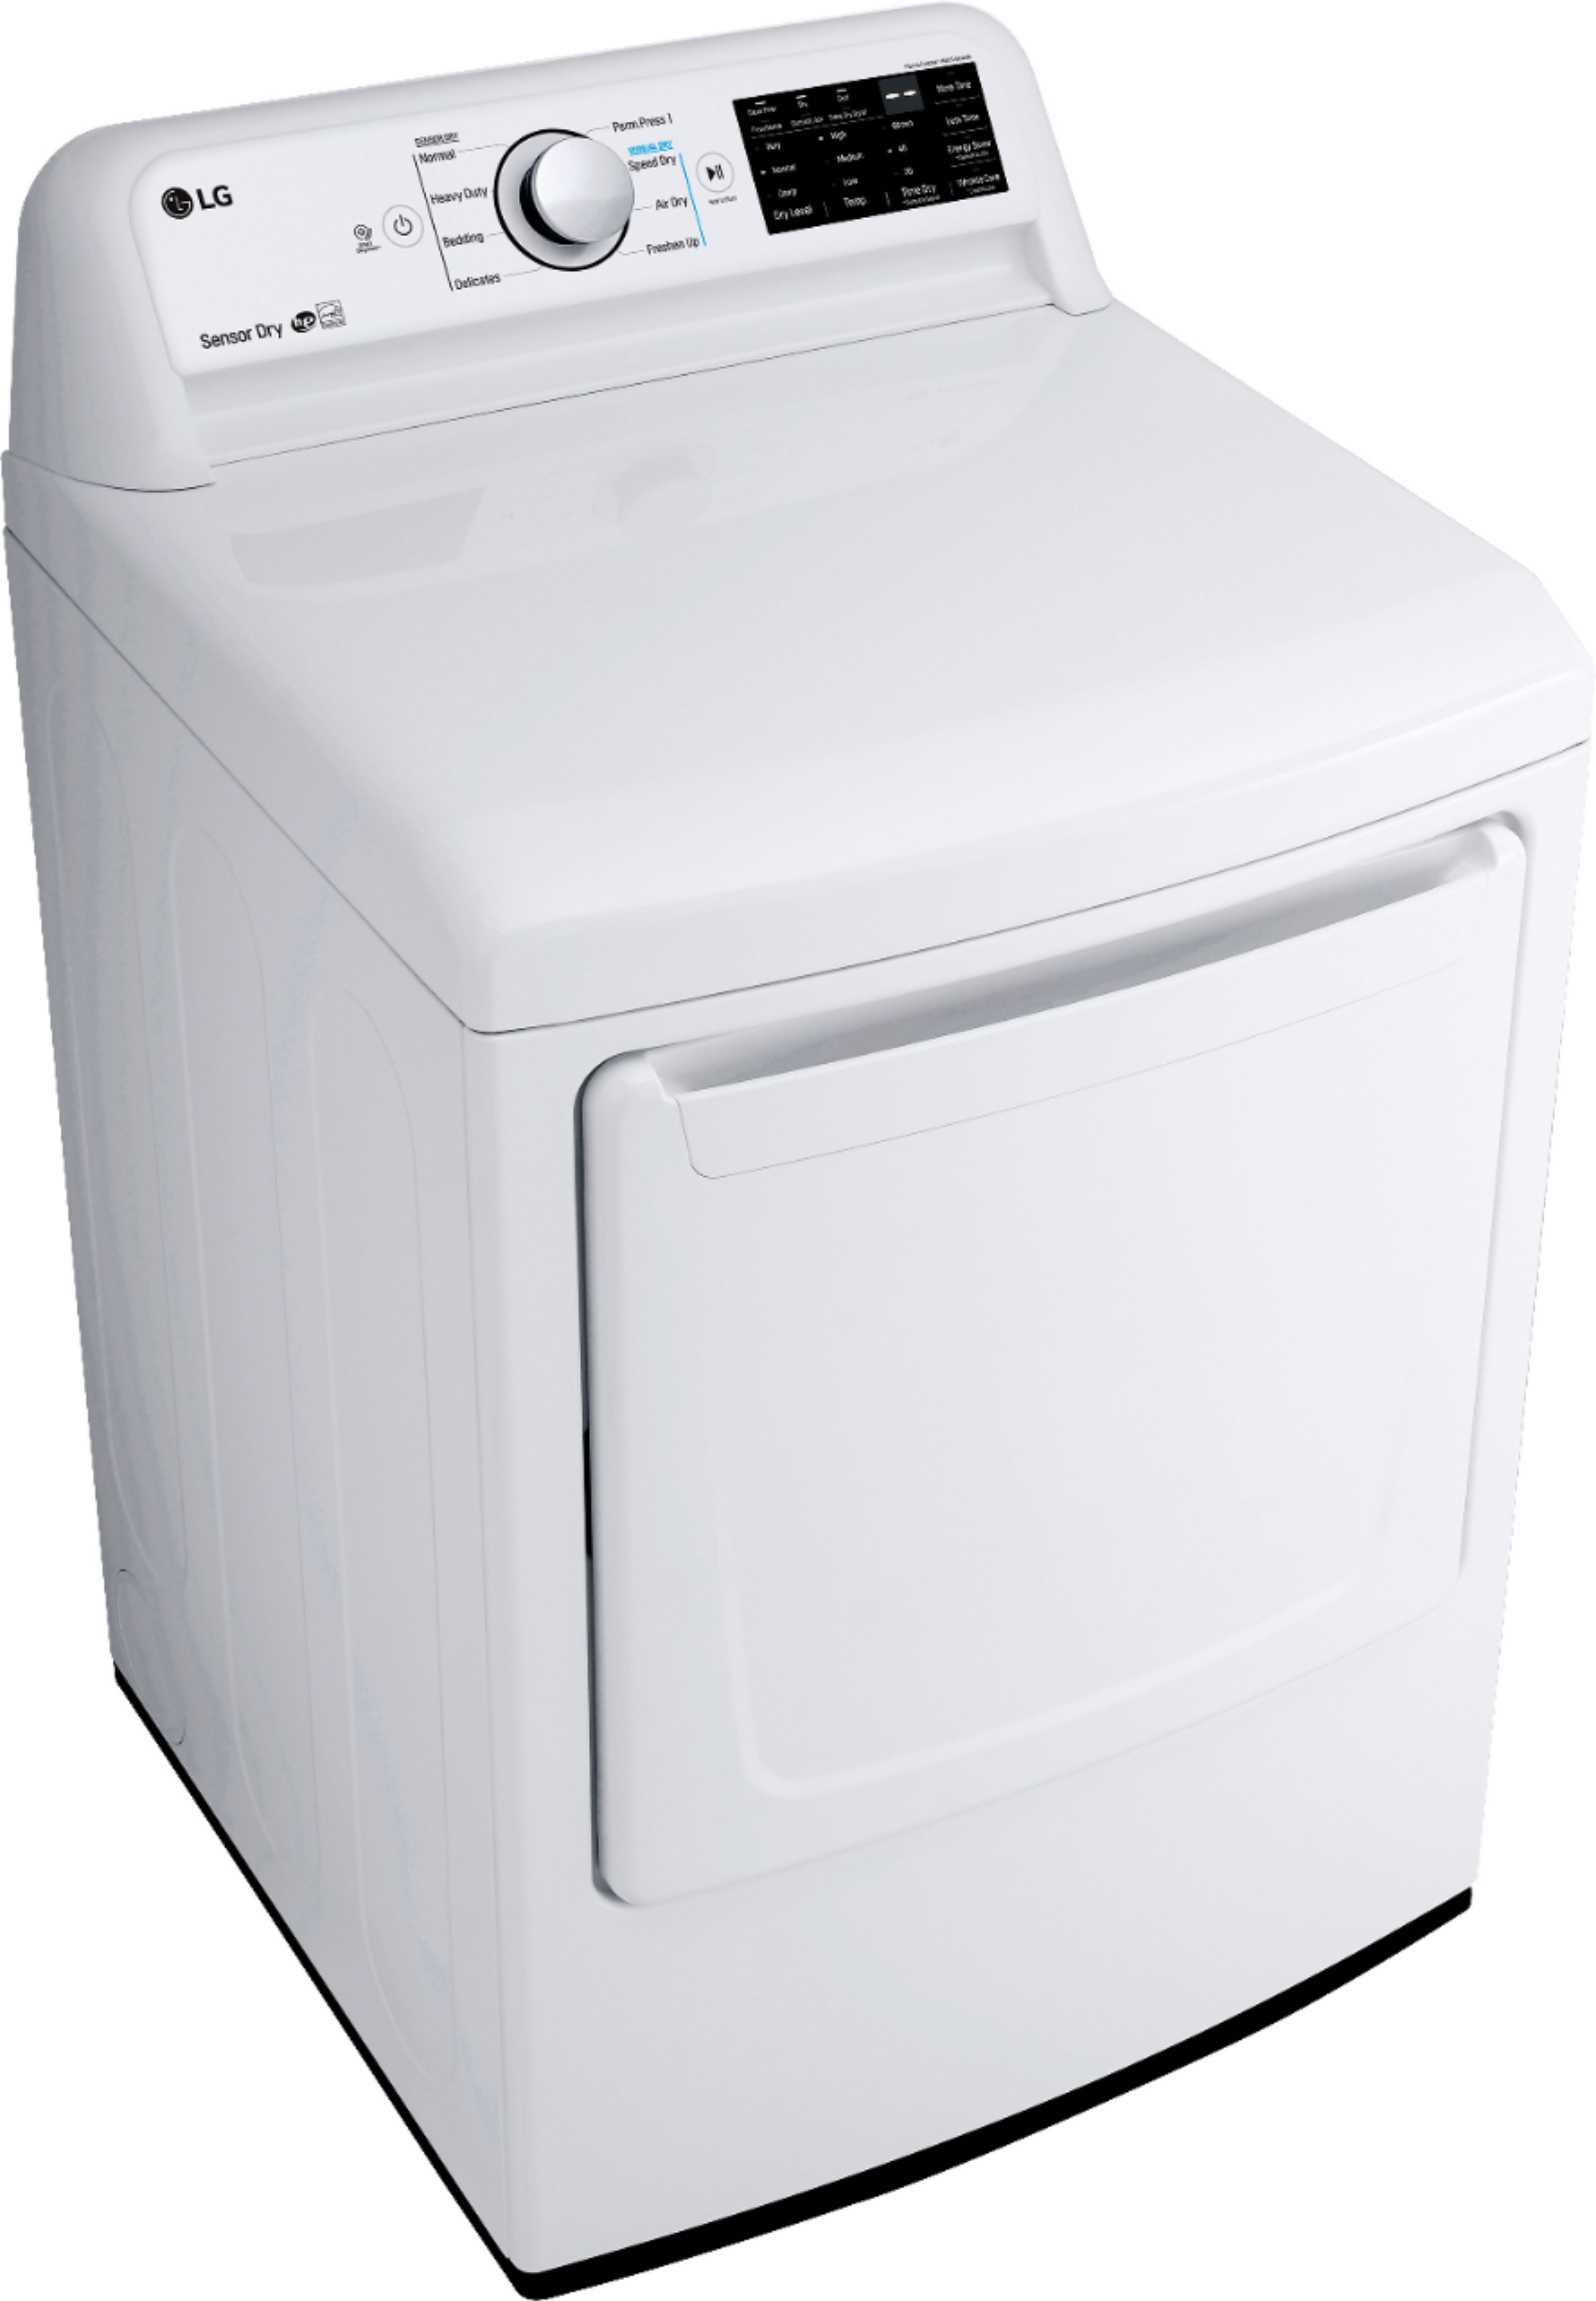 Angle View: LG - 7.3 Cu. Ft. Smart Gas Dryer with Steam and Sensor Dry - White